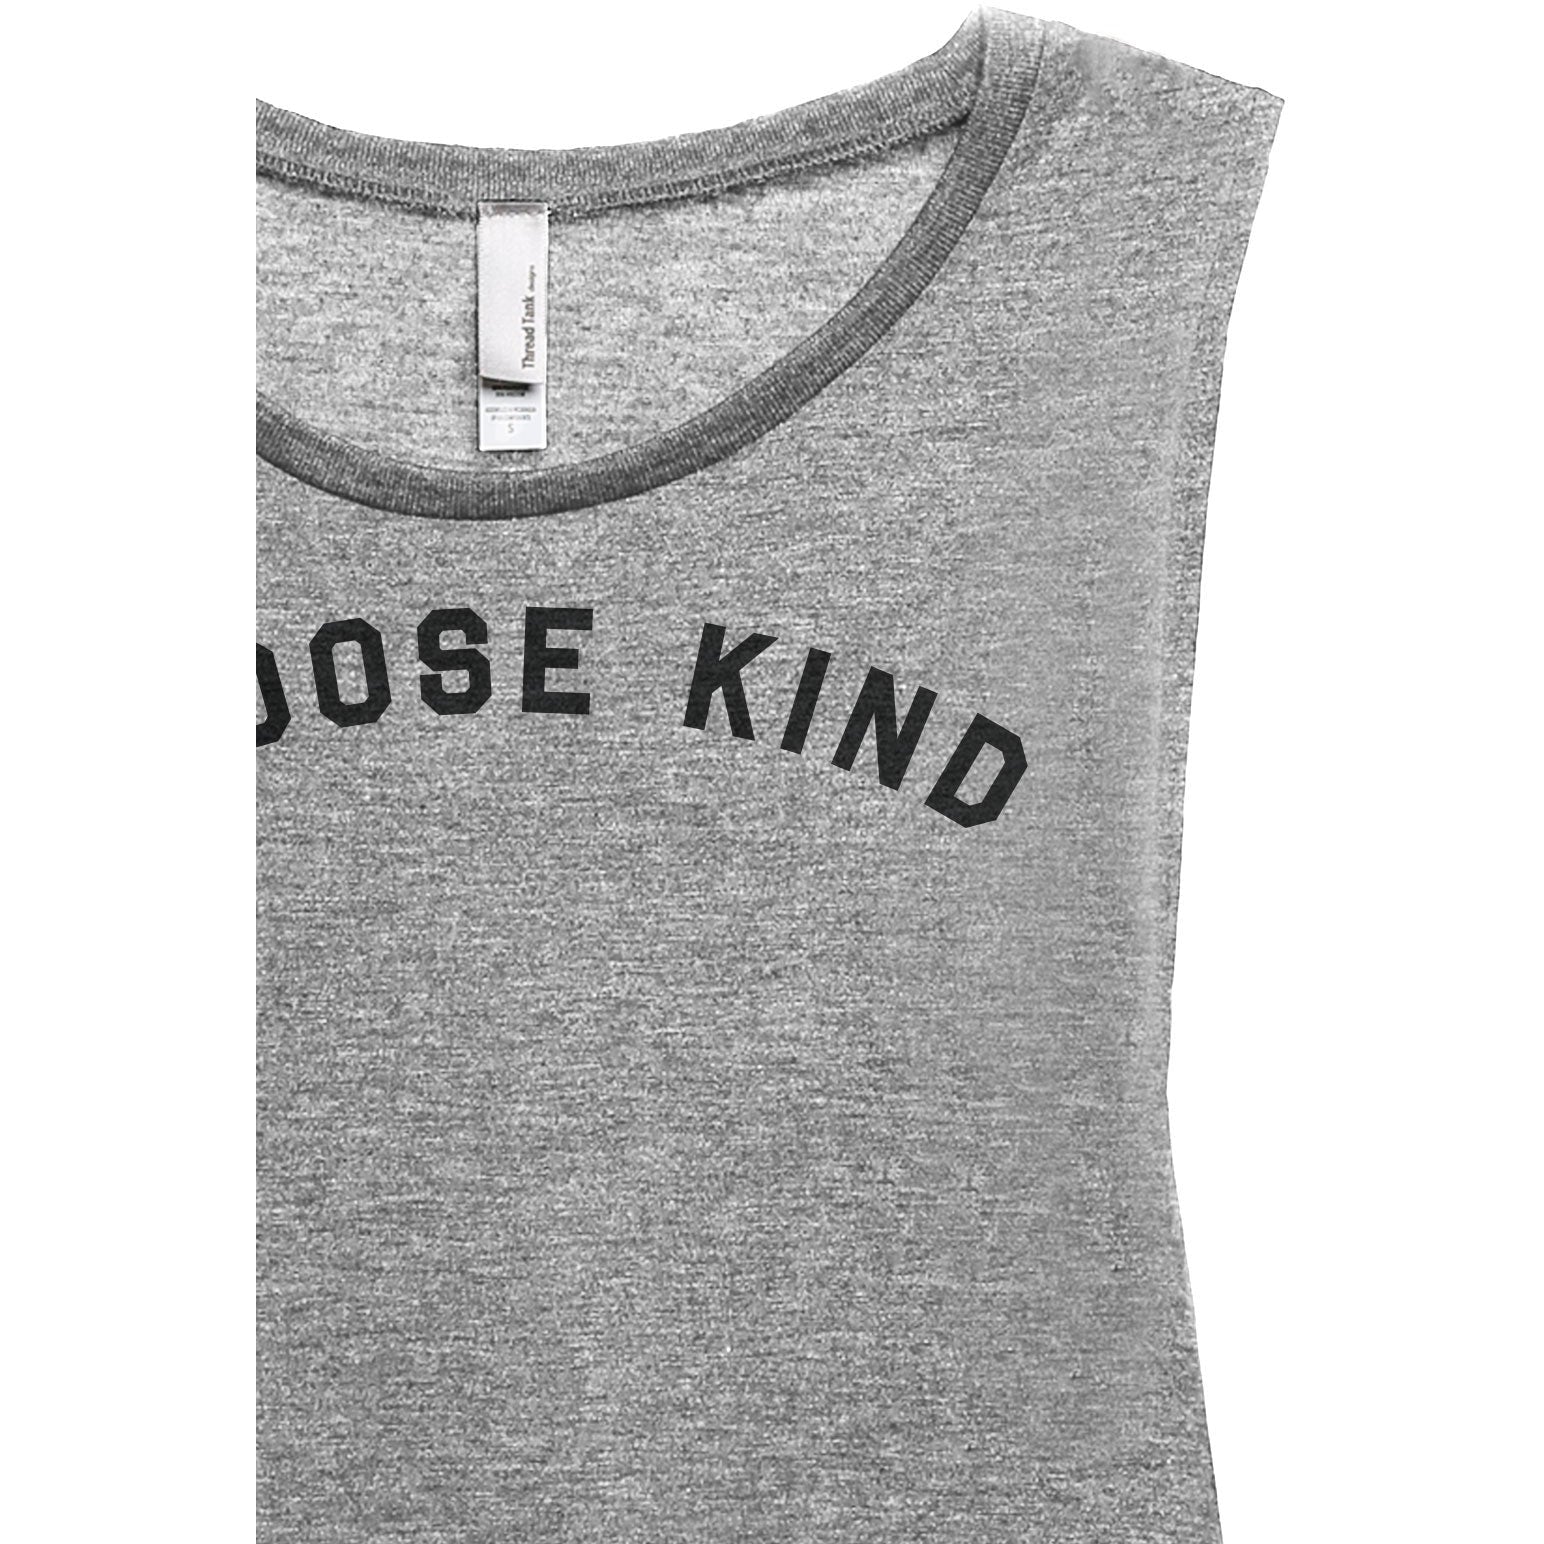 Choose Kind Women's Relaxed Muscle Tank Tee Heather Grey Closeup Details
